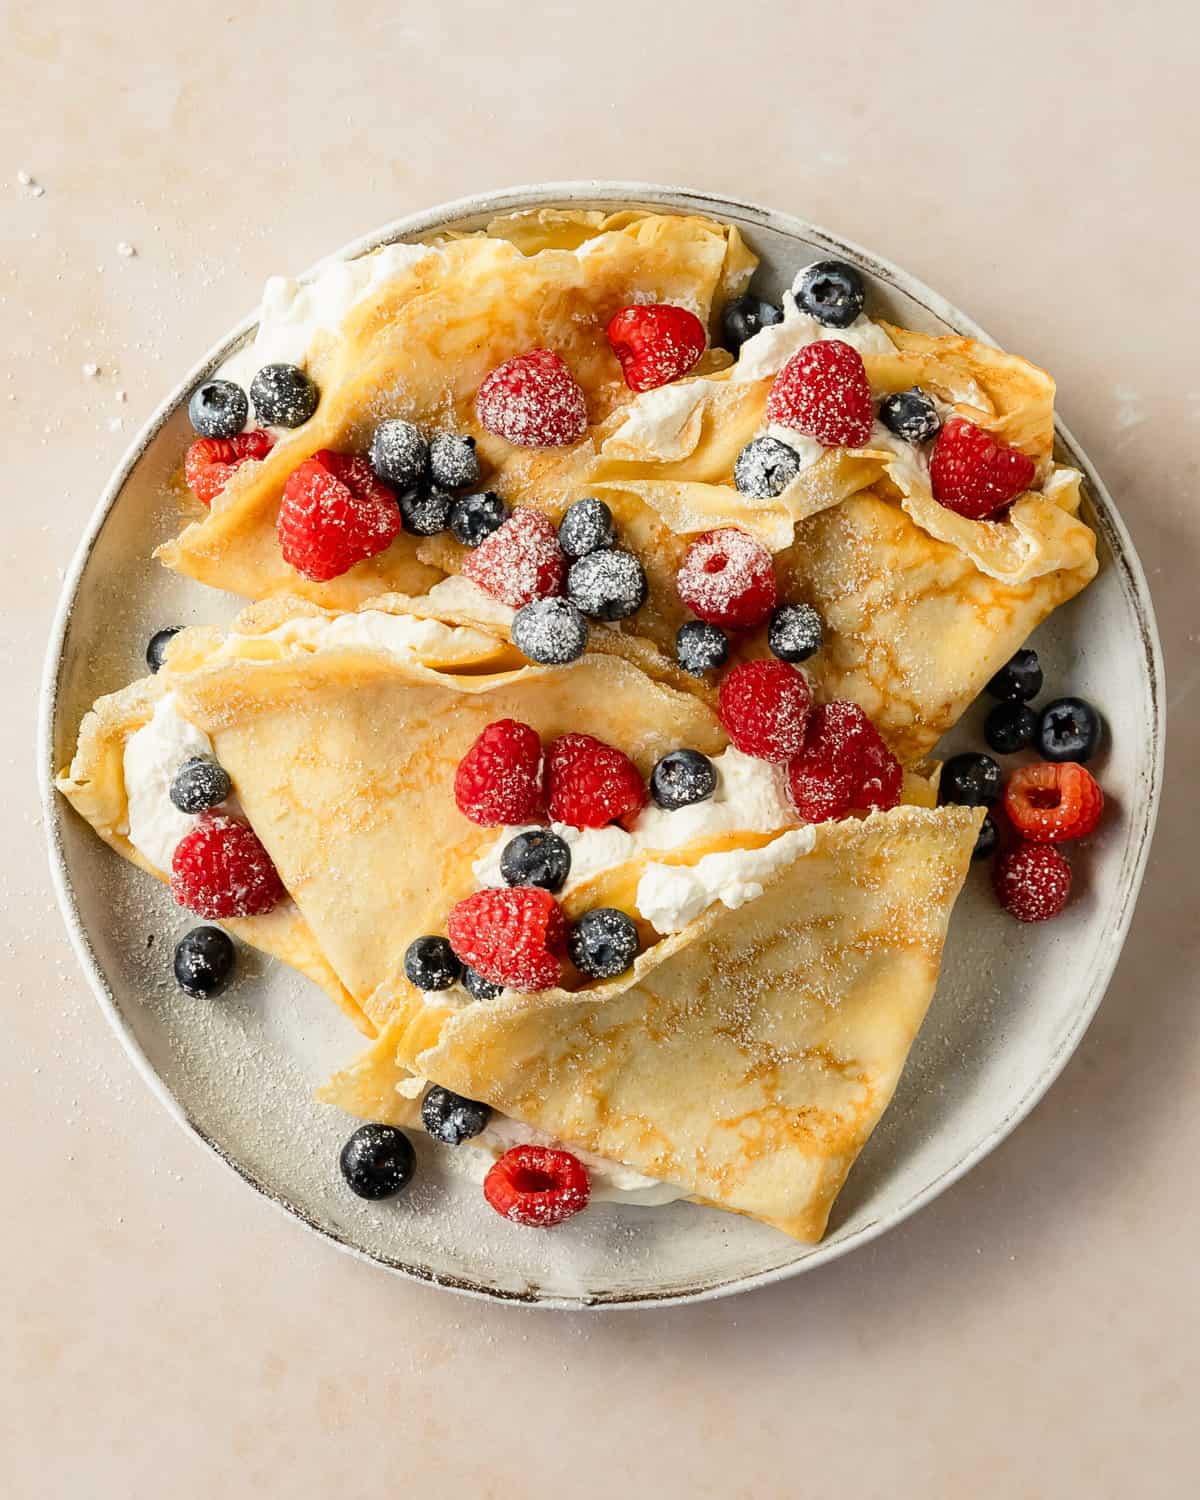 Crepes with pancake mix is a quick and easy way to make thin, buttery and delicious crepes in a fraction of the time. Learn how to make these irresistible crepe pancakes using basic pantry ingredients, in a few simple steps. Fill these pancake mix crepes with fresh berries and whipped cream for the perfect breakfast. 